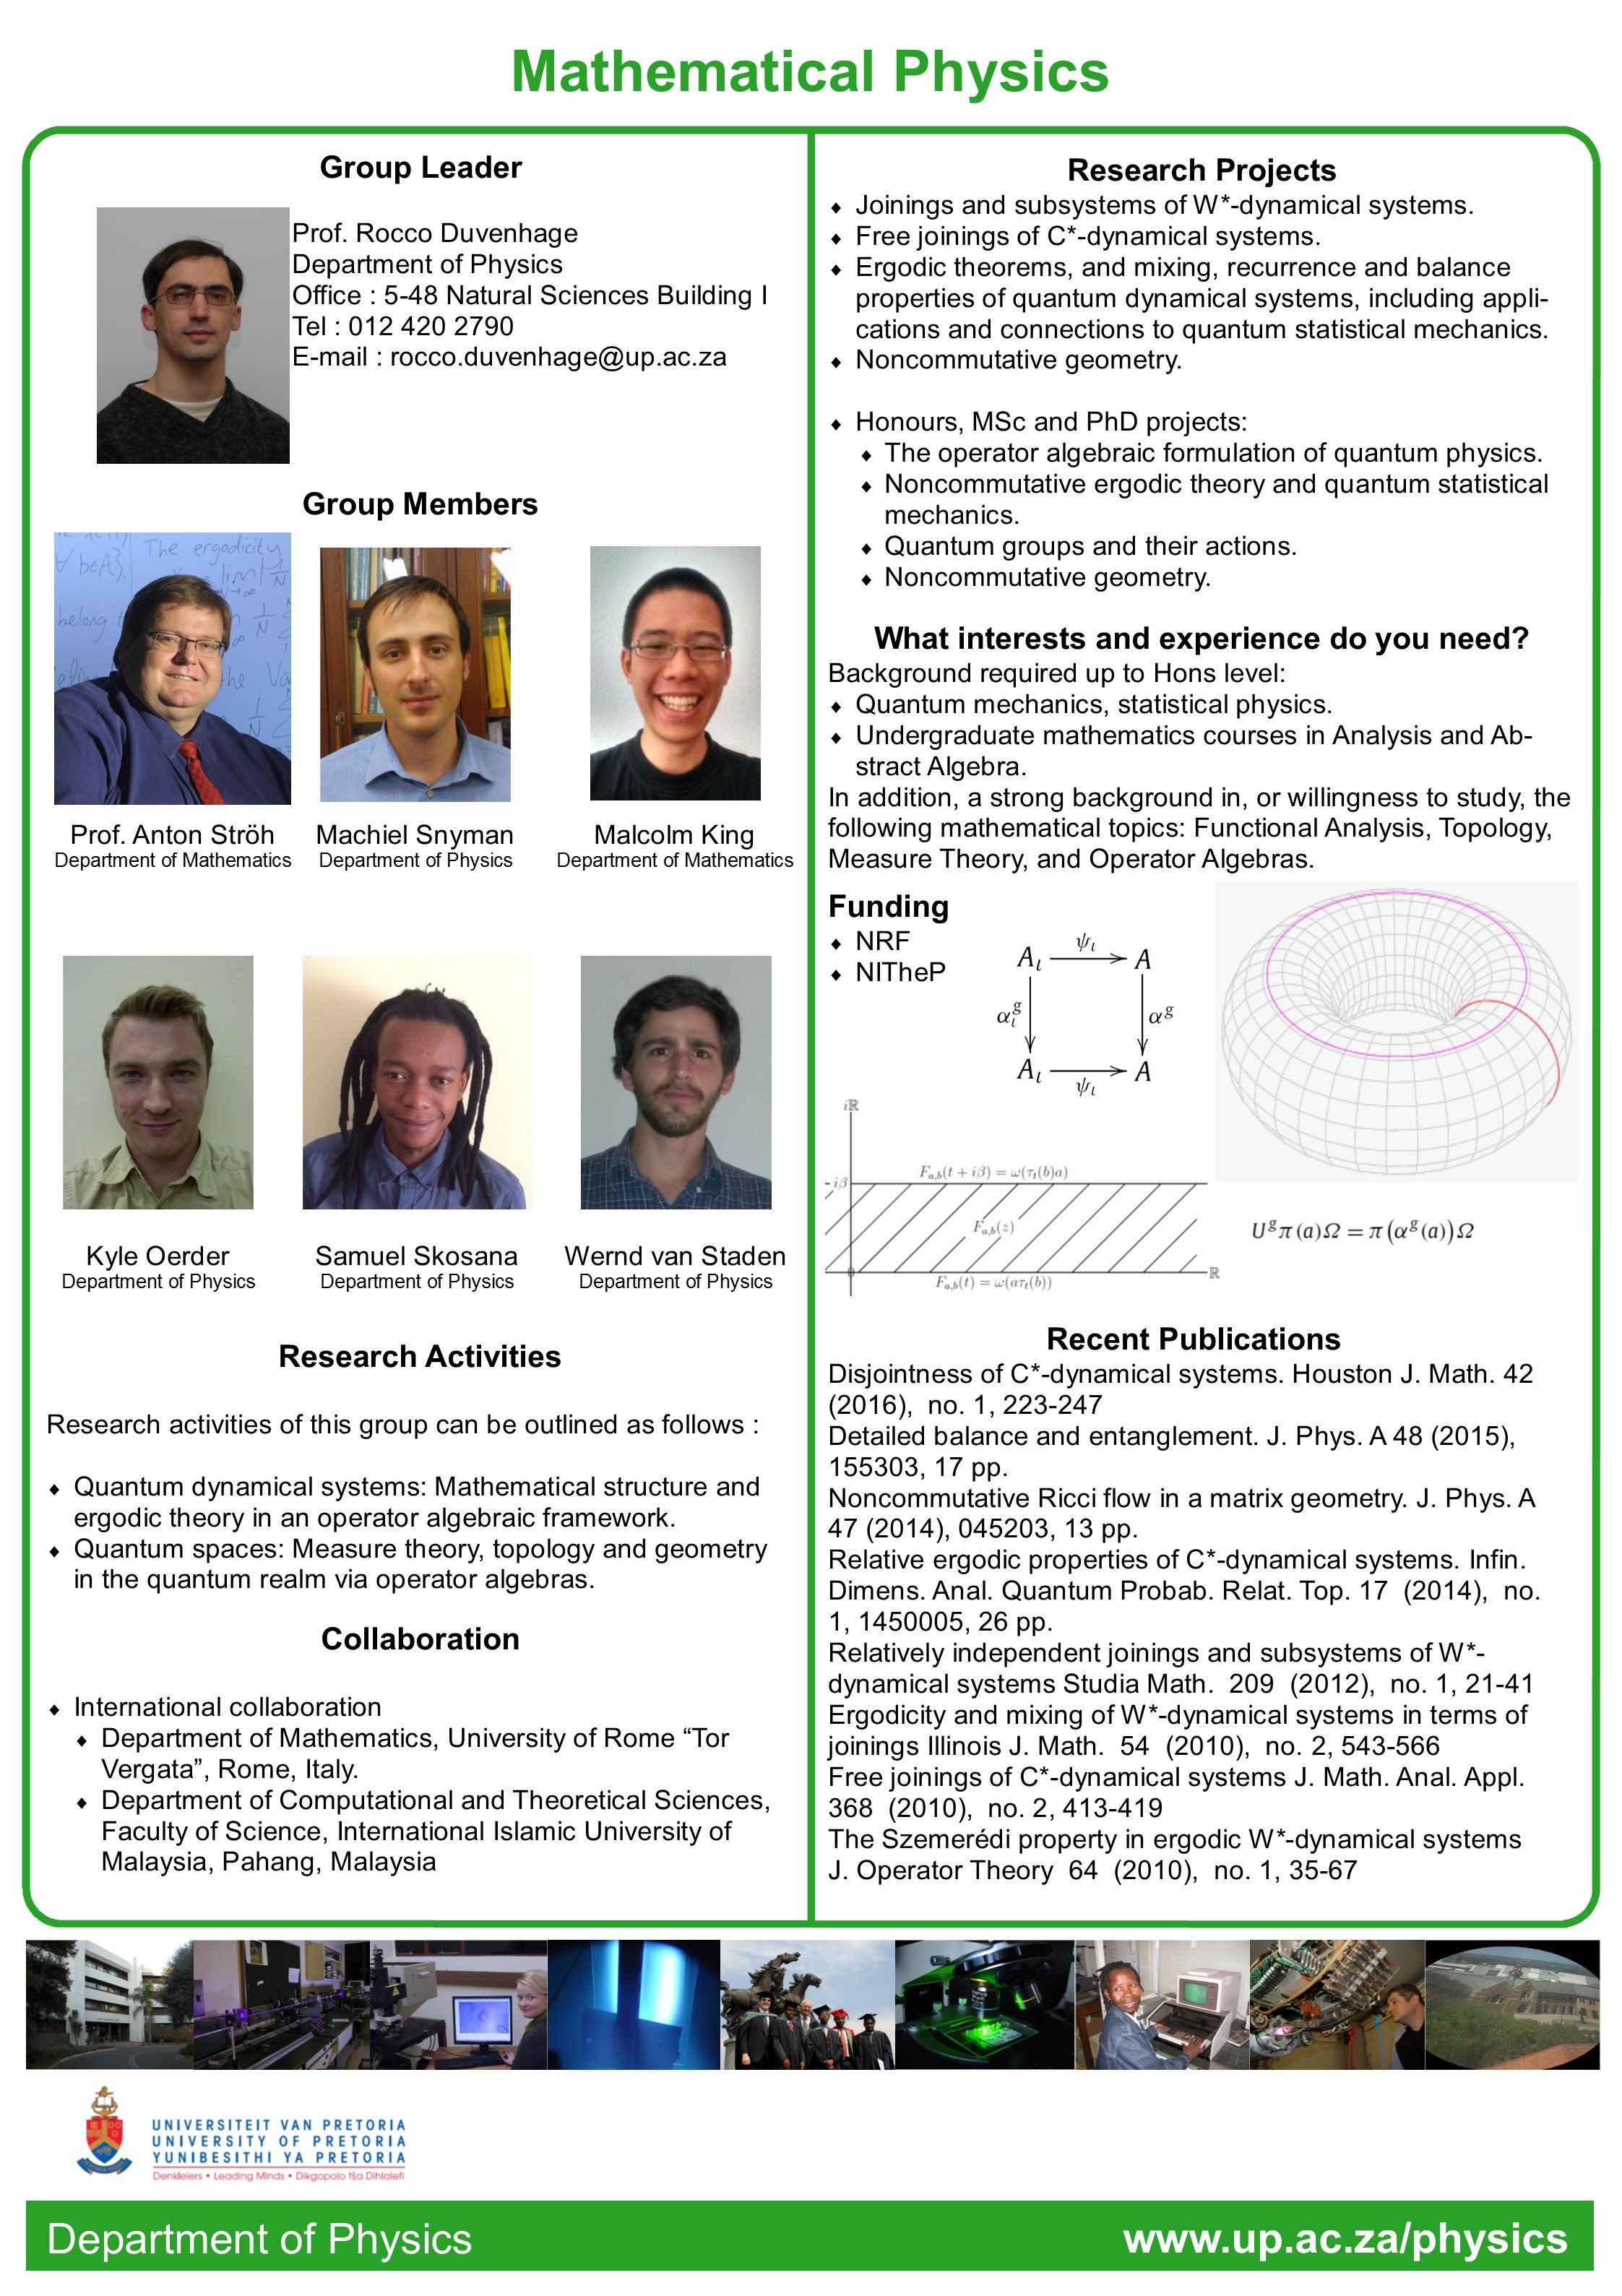 Mathematical physics research poster